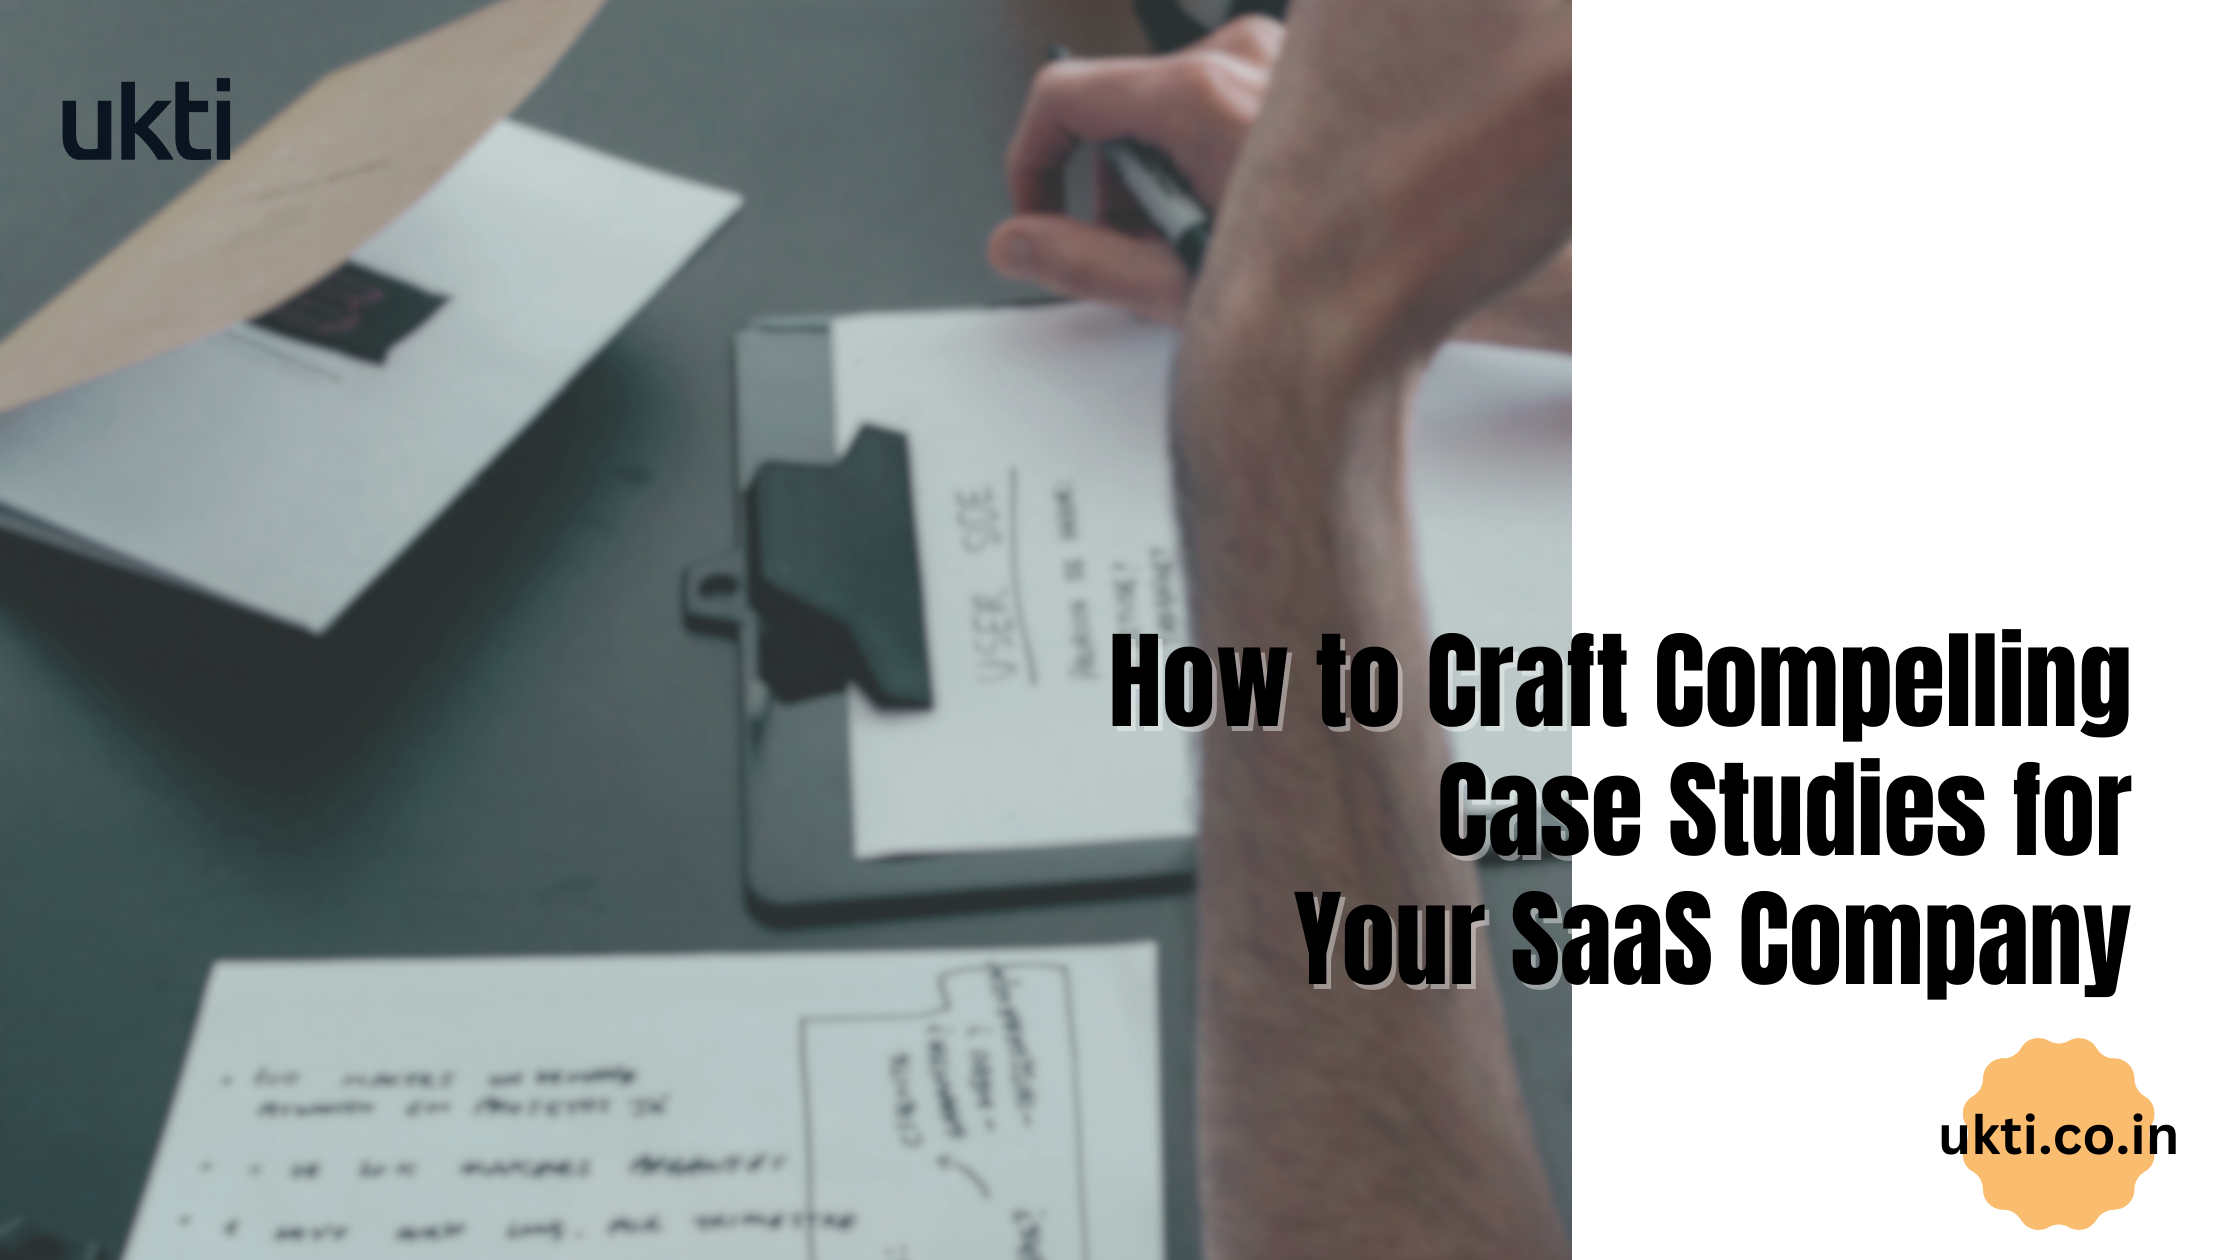 A Guide to Crafting Compelling SaaS Case Studies